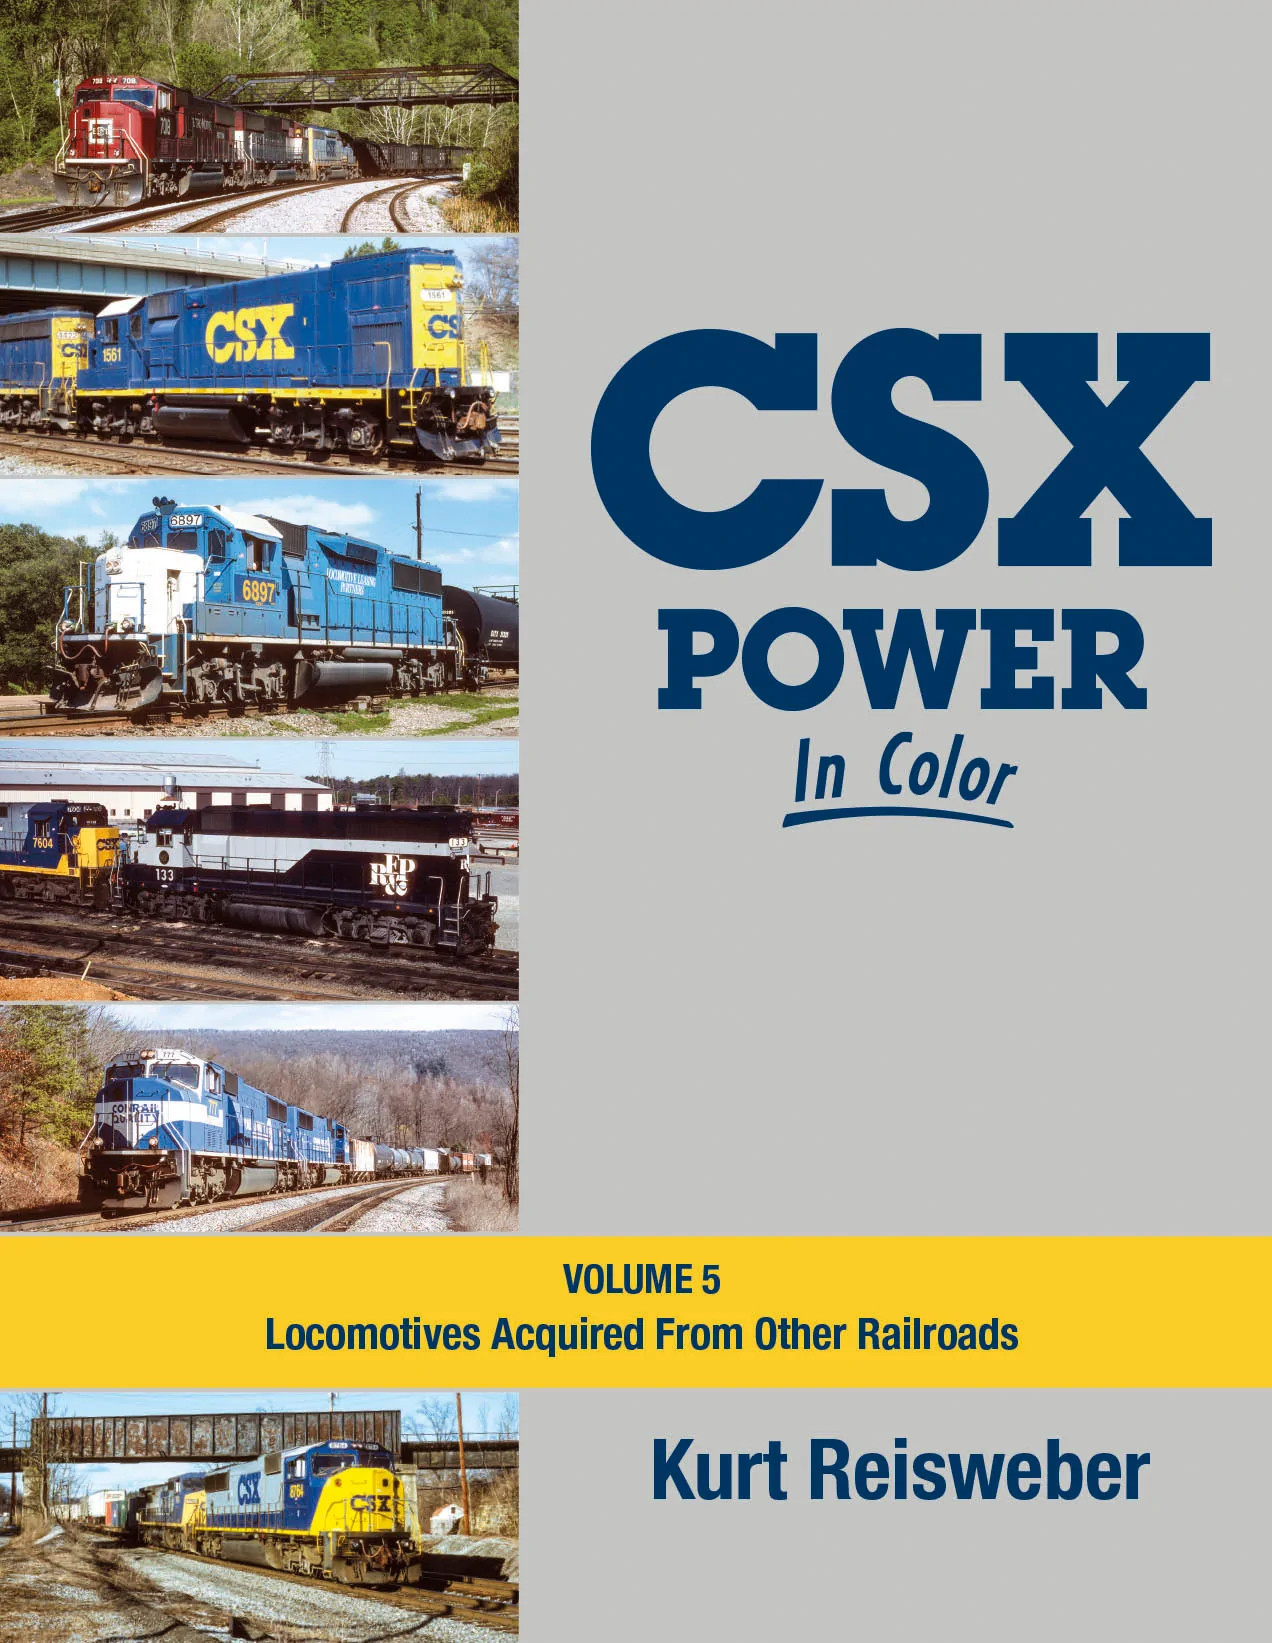 Morning Sun Books 1756 CSX Power In Color Volume 5: Locomotives Acquired From Other Railroads